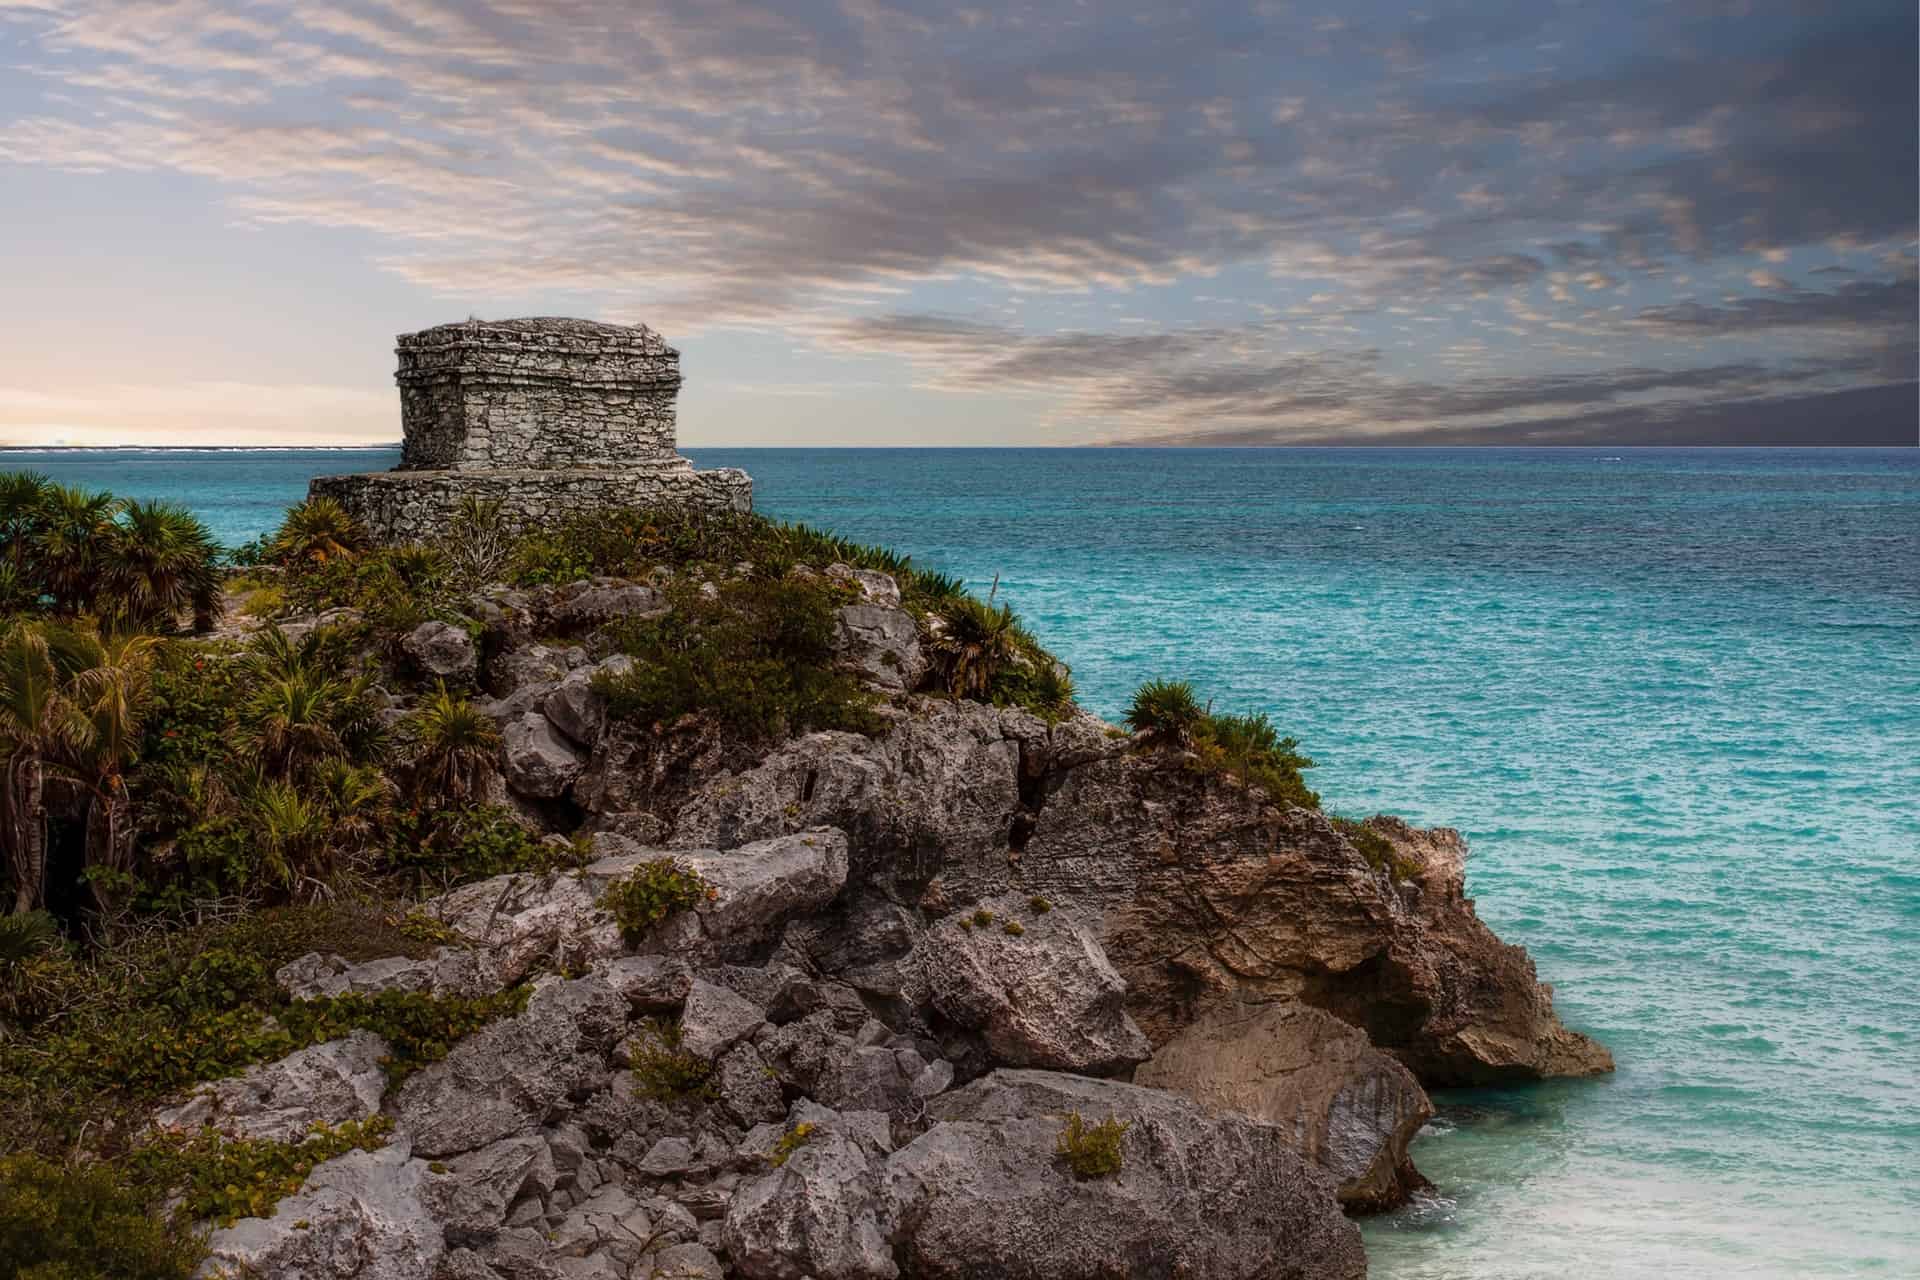 Best things to do in Tulum Mexico - Katrina Julia - Ruins at the beach by Vince Russell on Unsplash